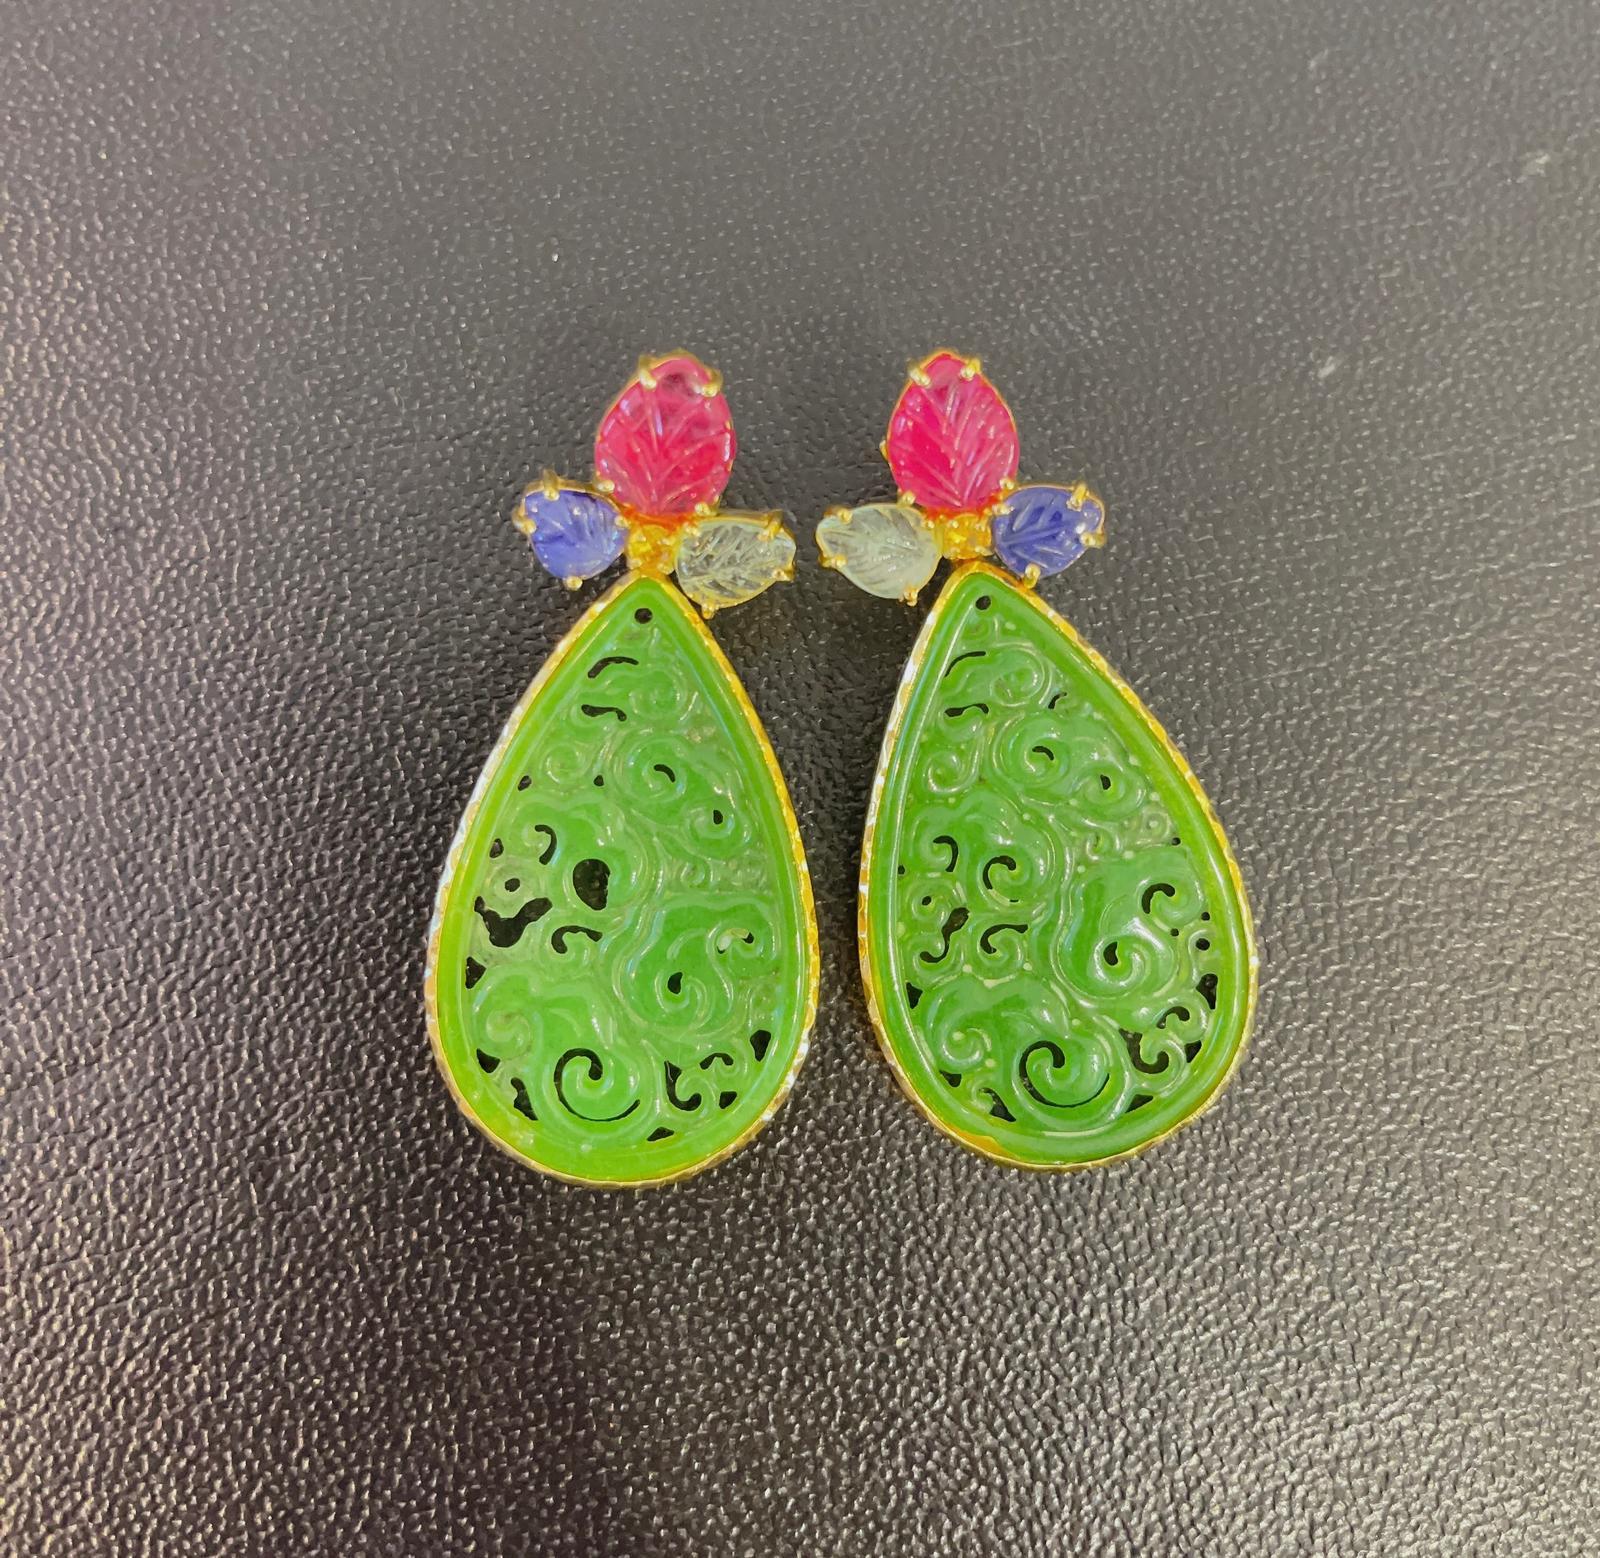 Bochic “Orient” Ruby, Emerald & Sapphire Earrings Set In 22K Gold & Silver 
From the “Orient” collection 
Natural Ruby - 5 carats 
Natural Blue color sapphires  - 2 carats
From Sri Lanka 
Natural Light Green Emeralds - 2 carats 
From Zambia 
Set in